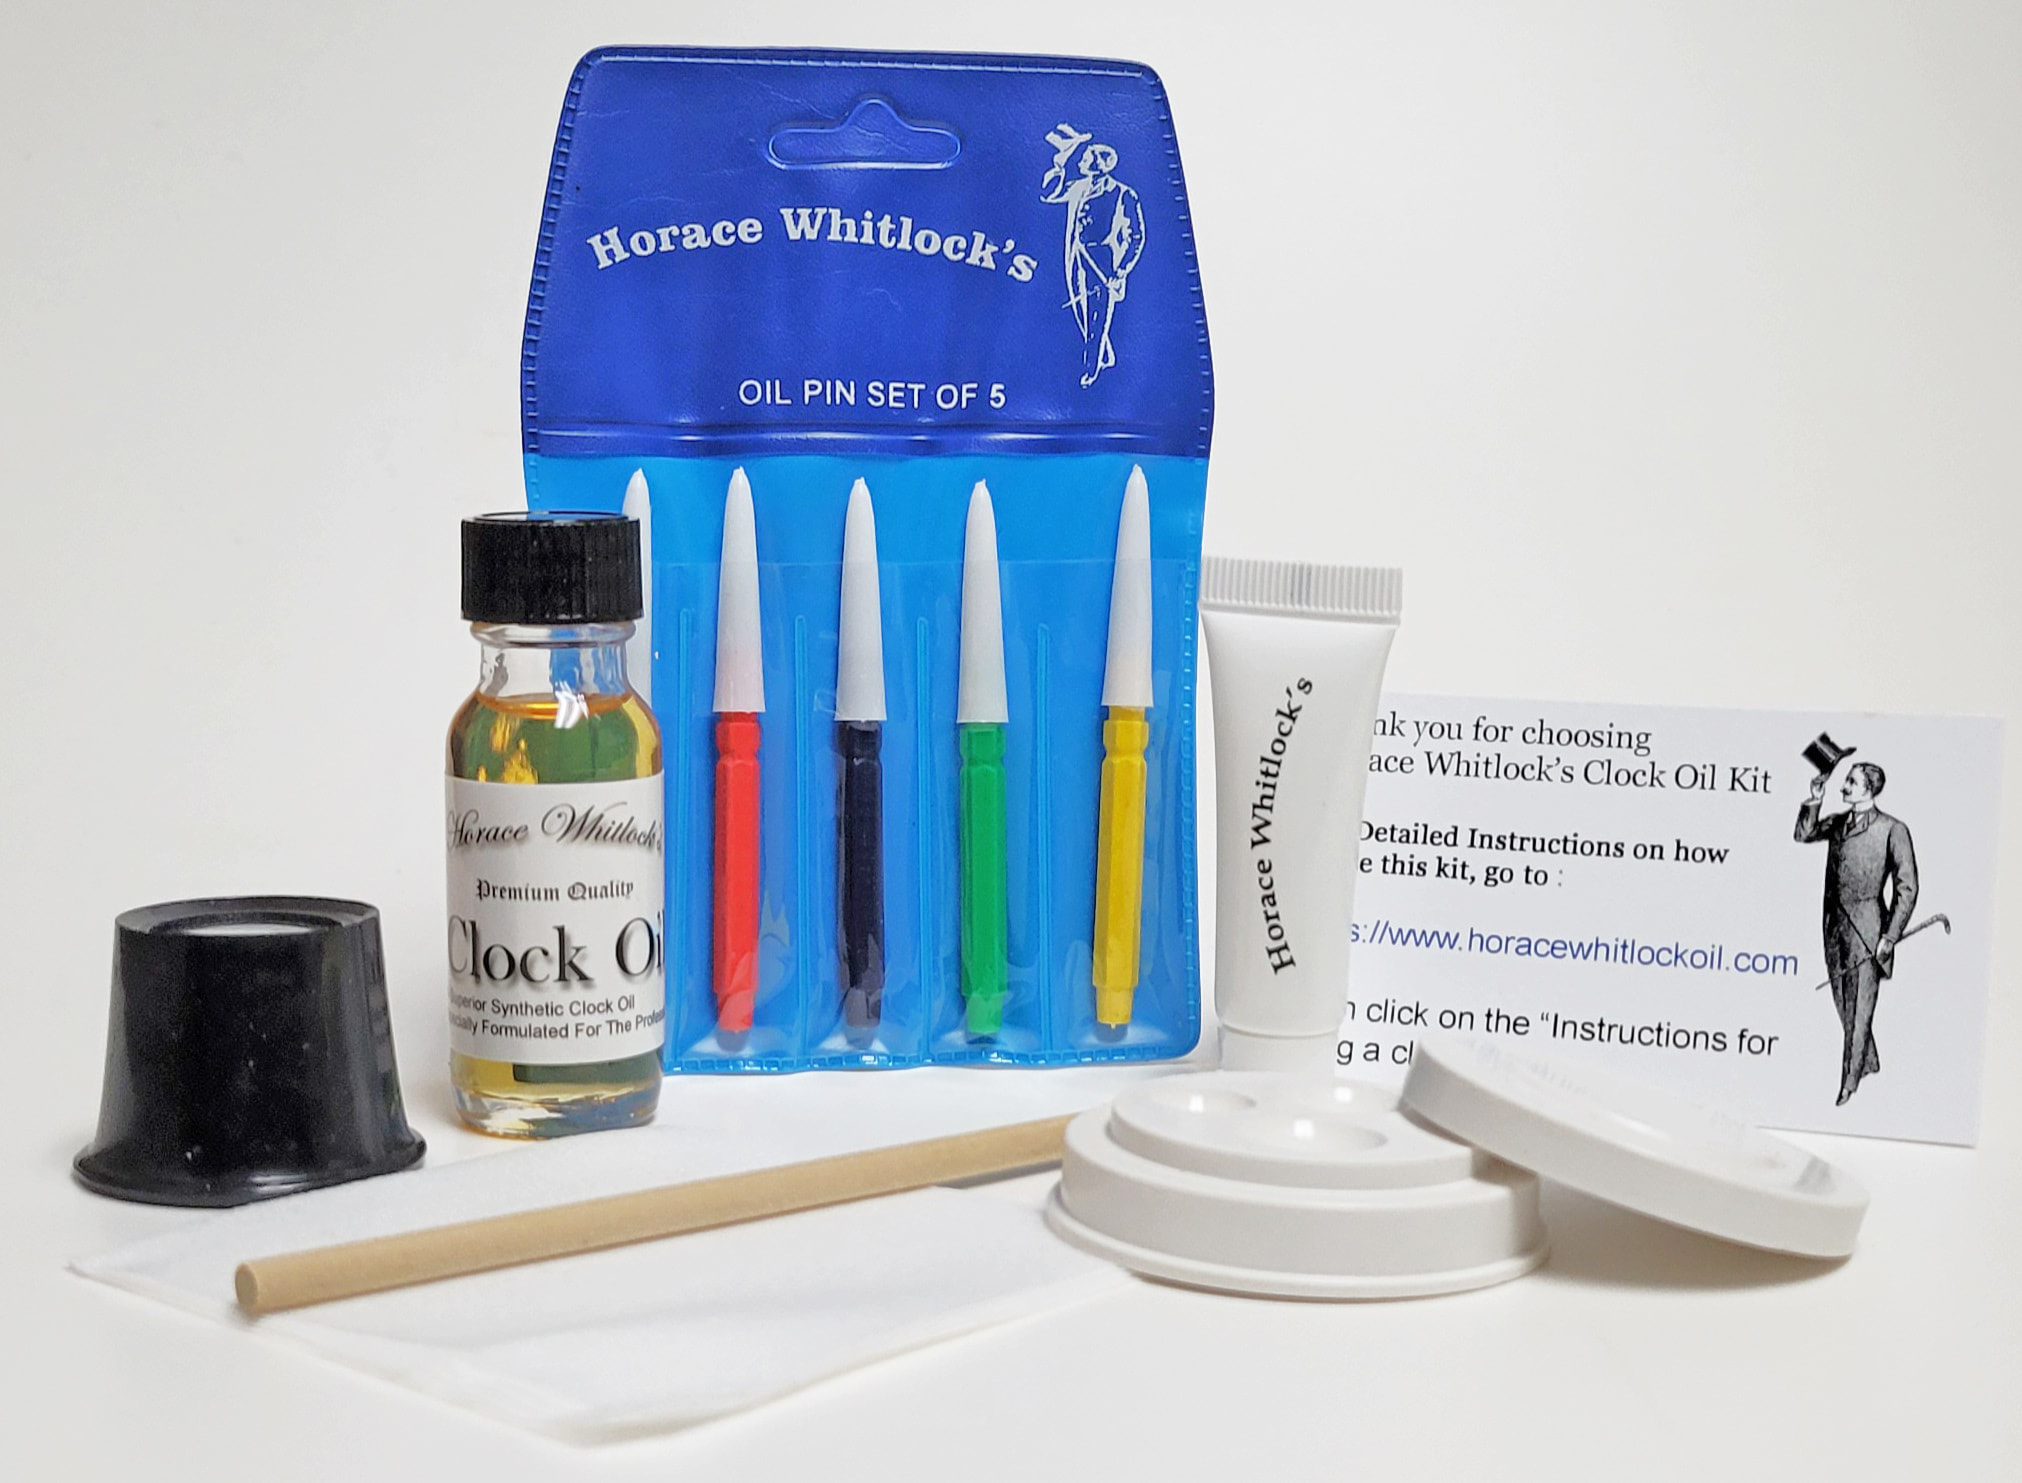 #1 BEST Clock Kit Specially Designed For Cleaning & Oiling All Your Clocks